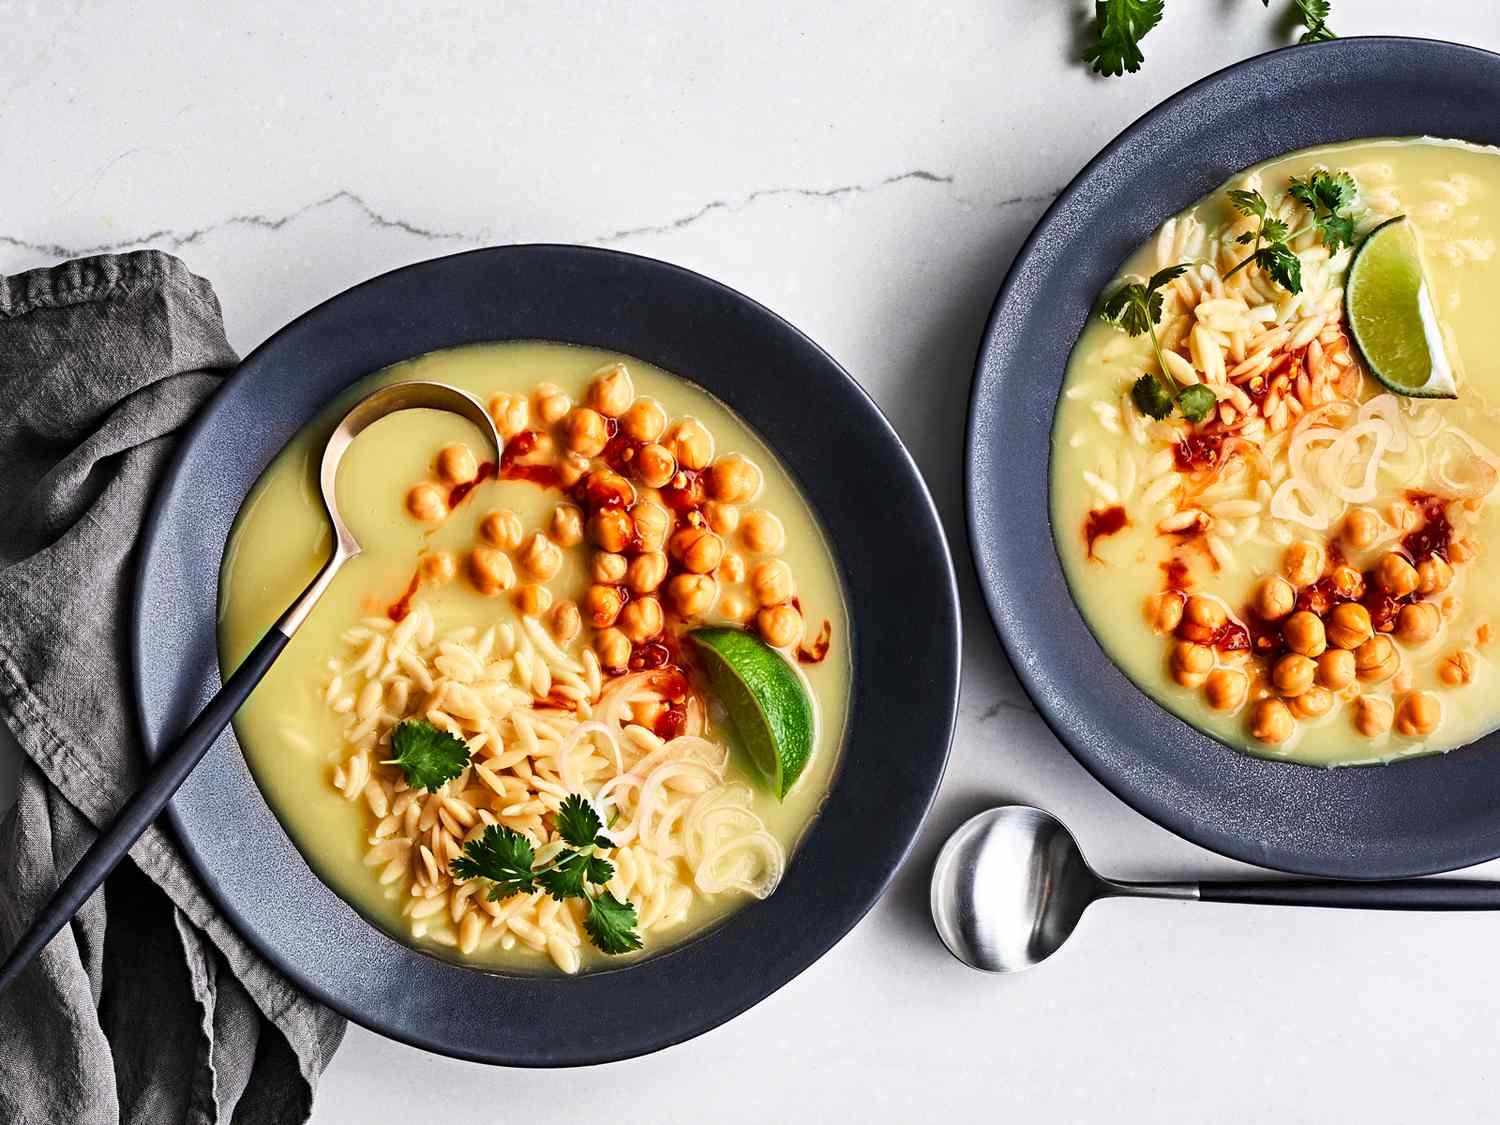 Orzo and Chickpeas with Turmeric-Ginger Broth